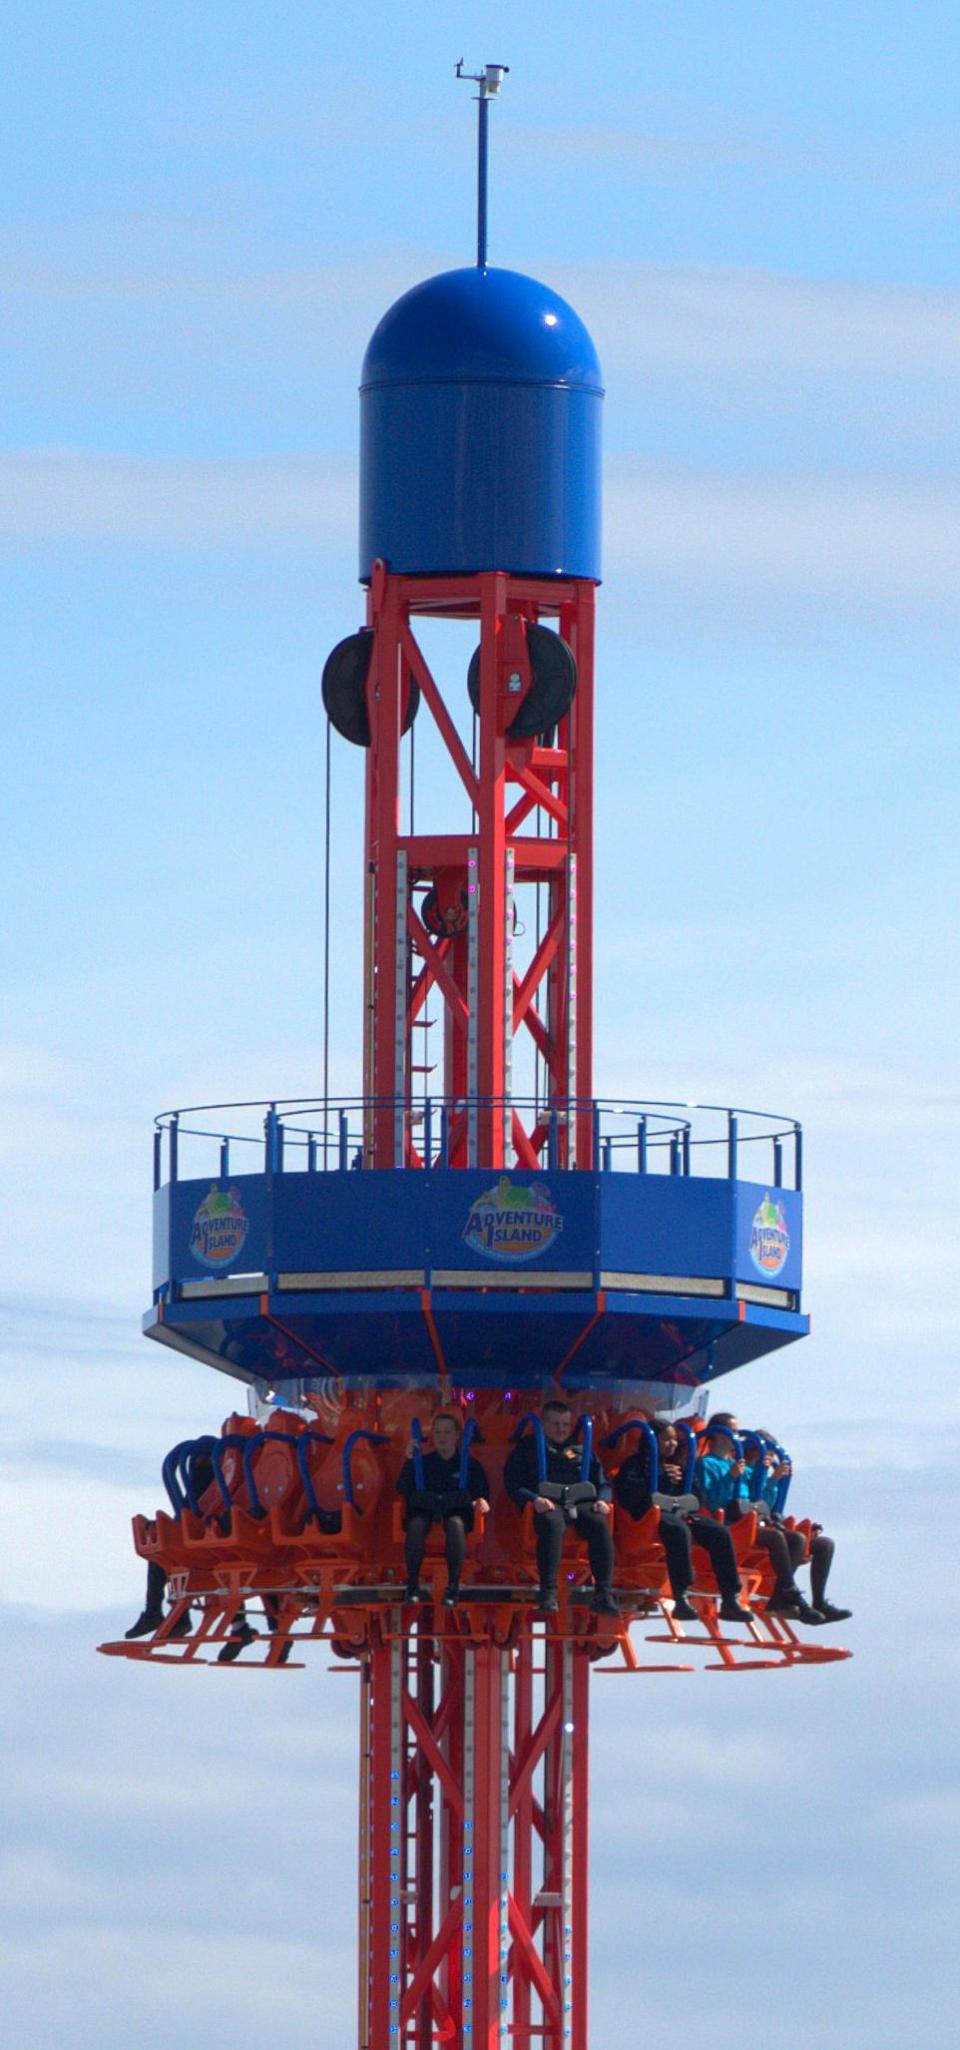 Echo: Don't look down - riders pictured at the top of new drop tower Vertigo at Adventure Island